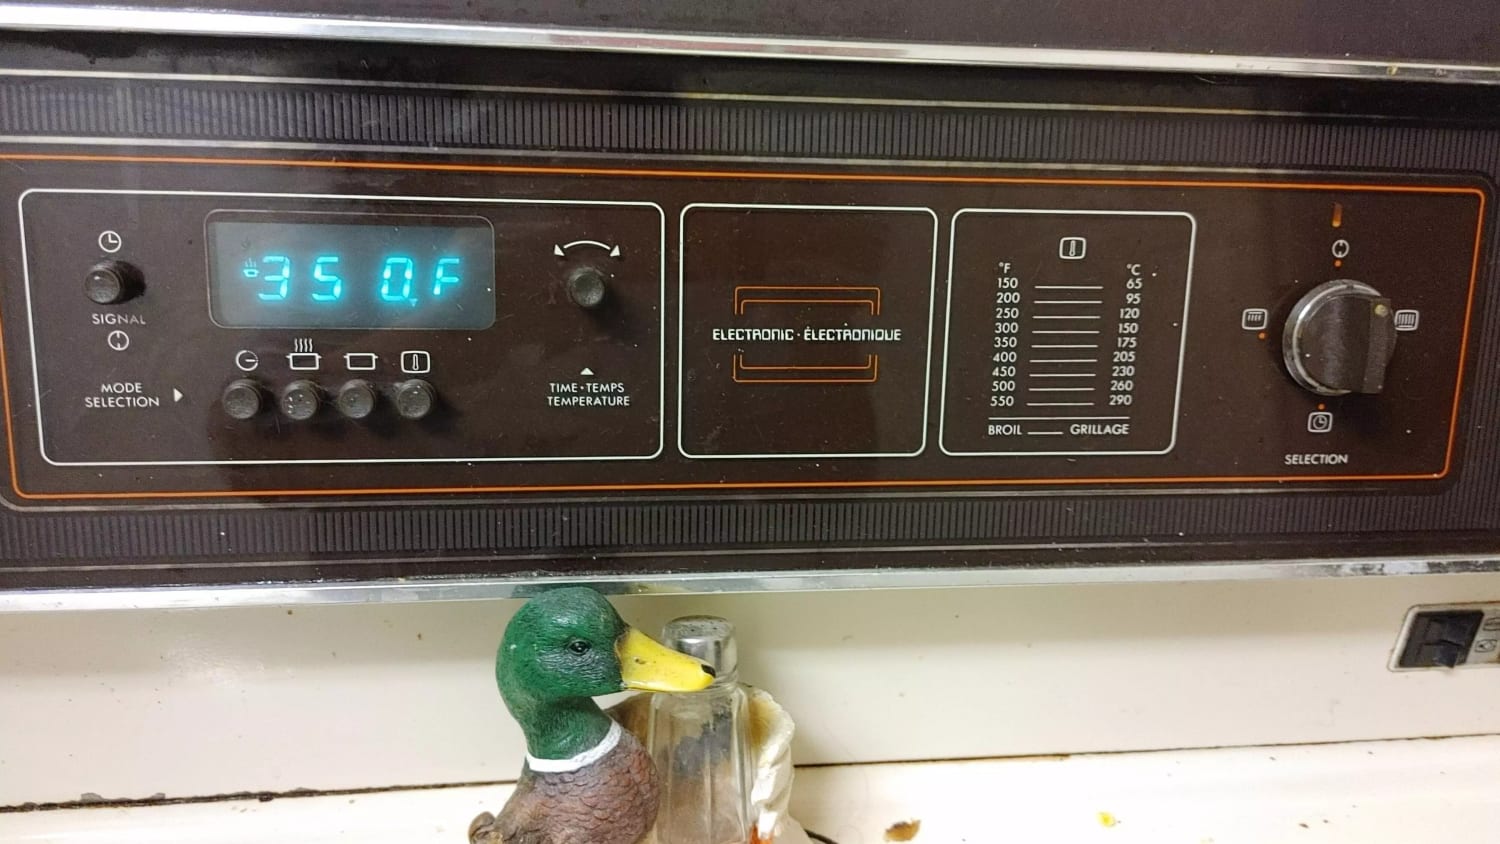 How do I properly use this oven? What exactly do the symbols mean?